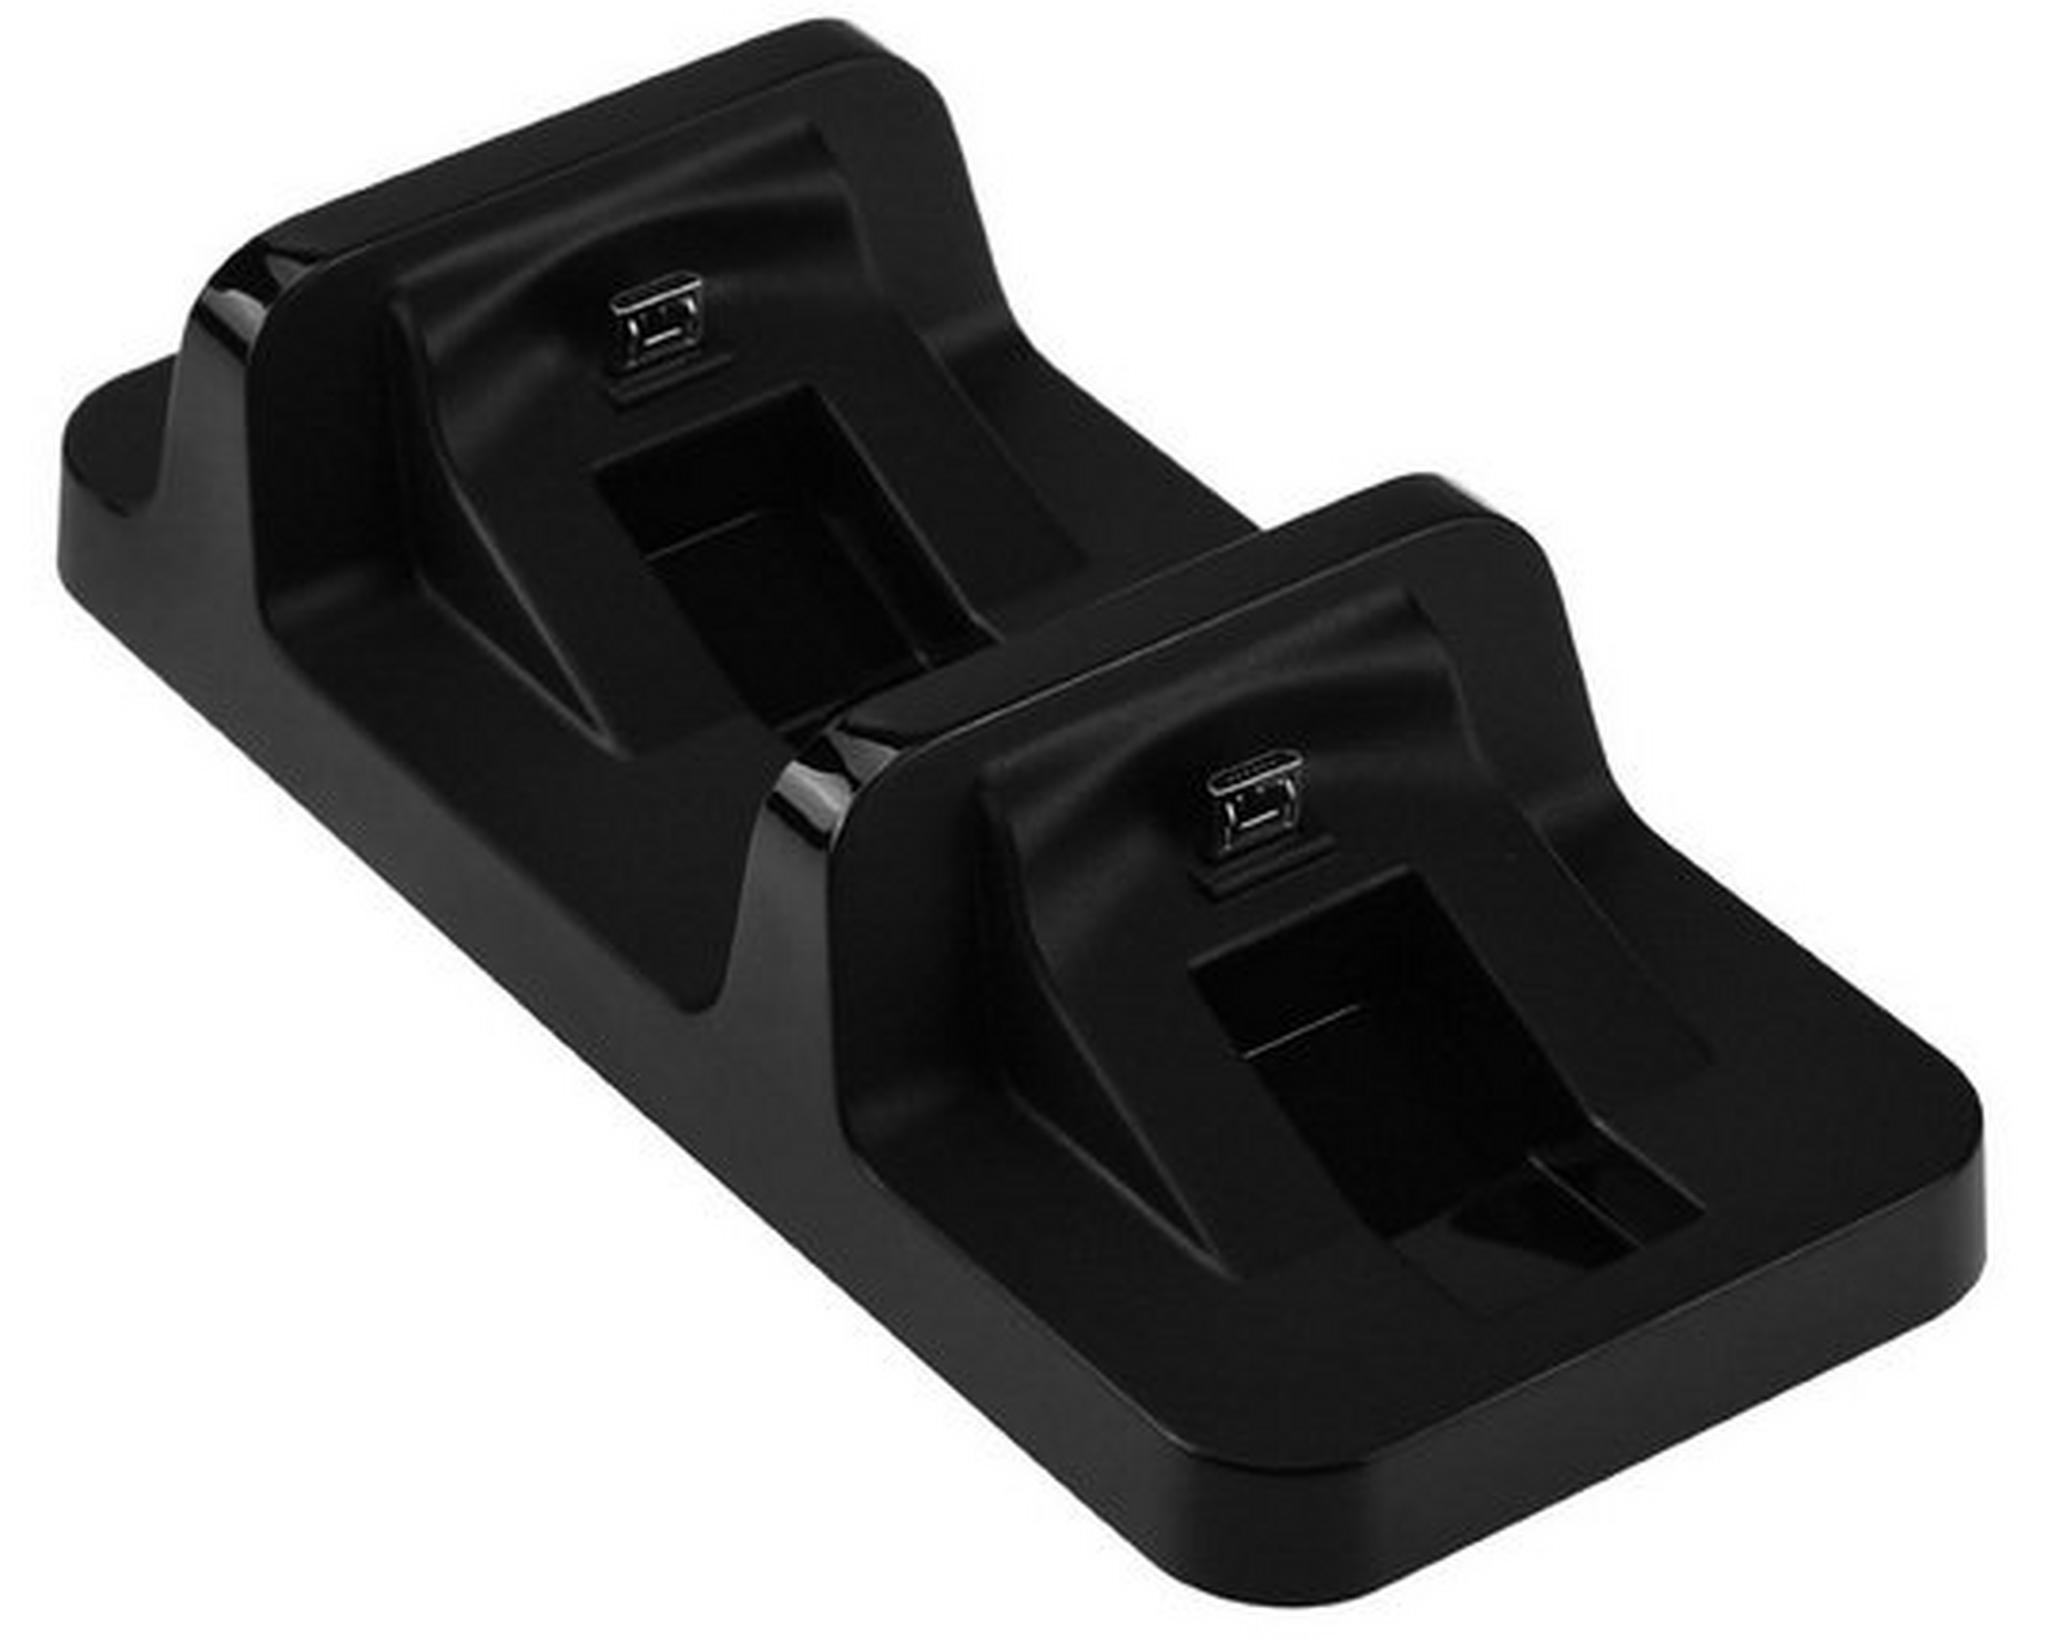 Dual Charging Dock for PlayStation 4